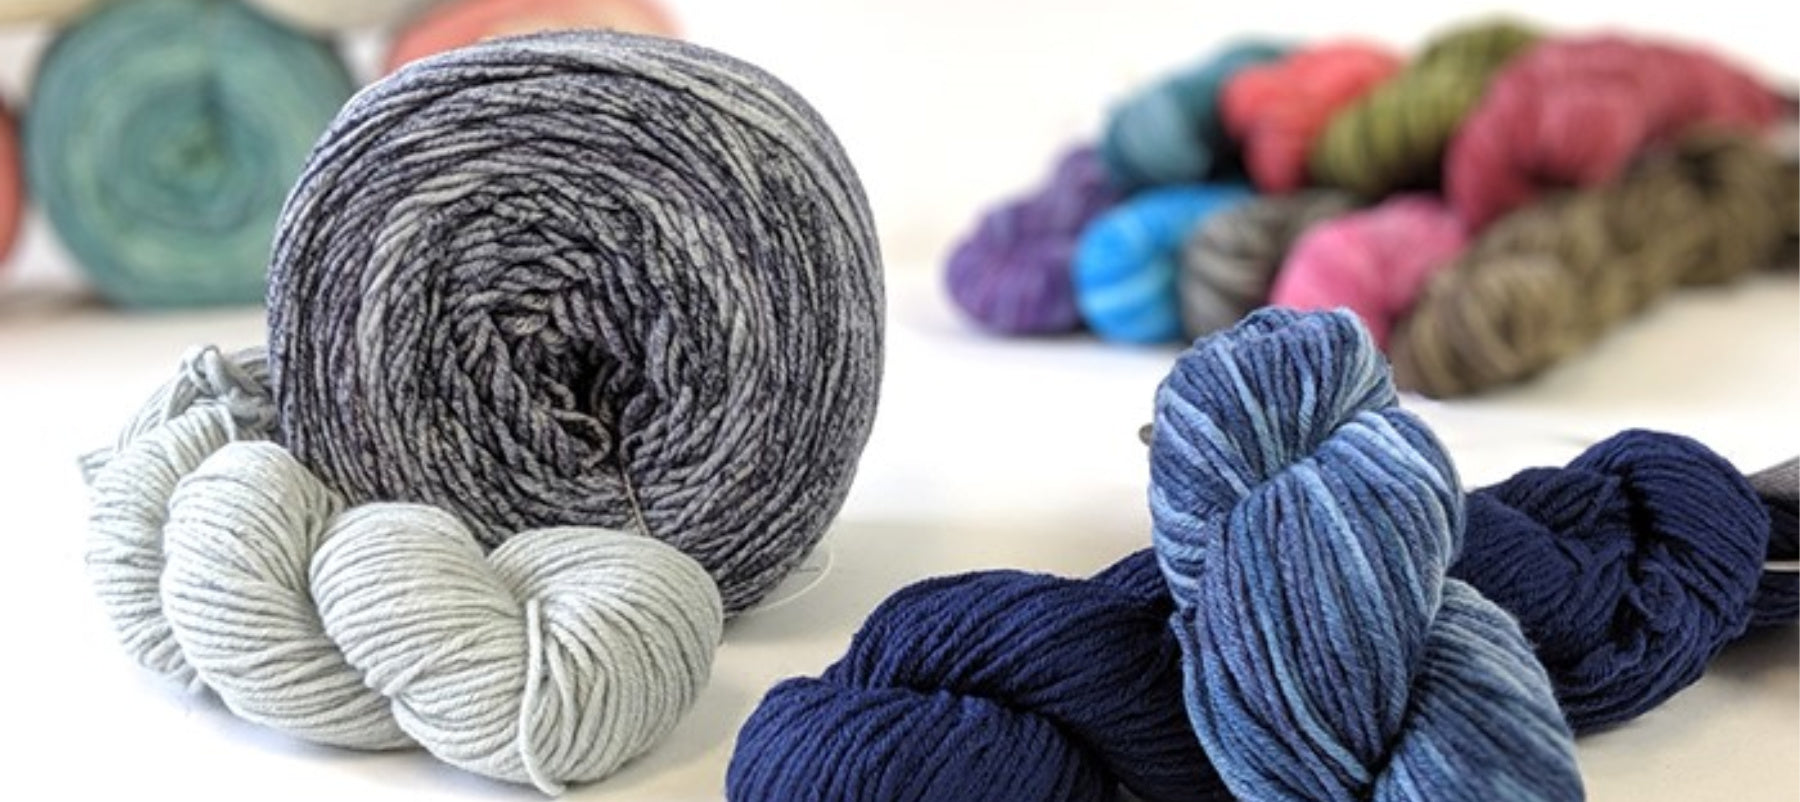 Join us for Michelle Hunter's Final Knit-Along!